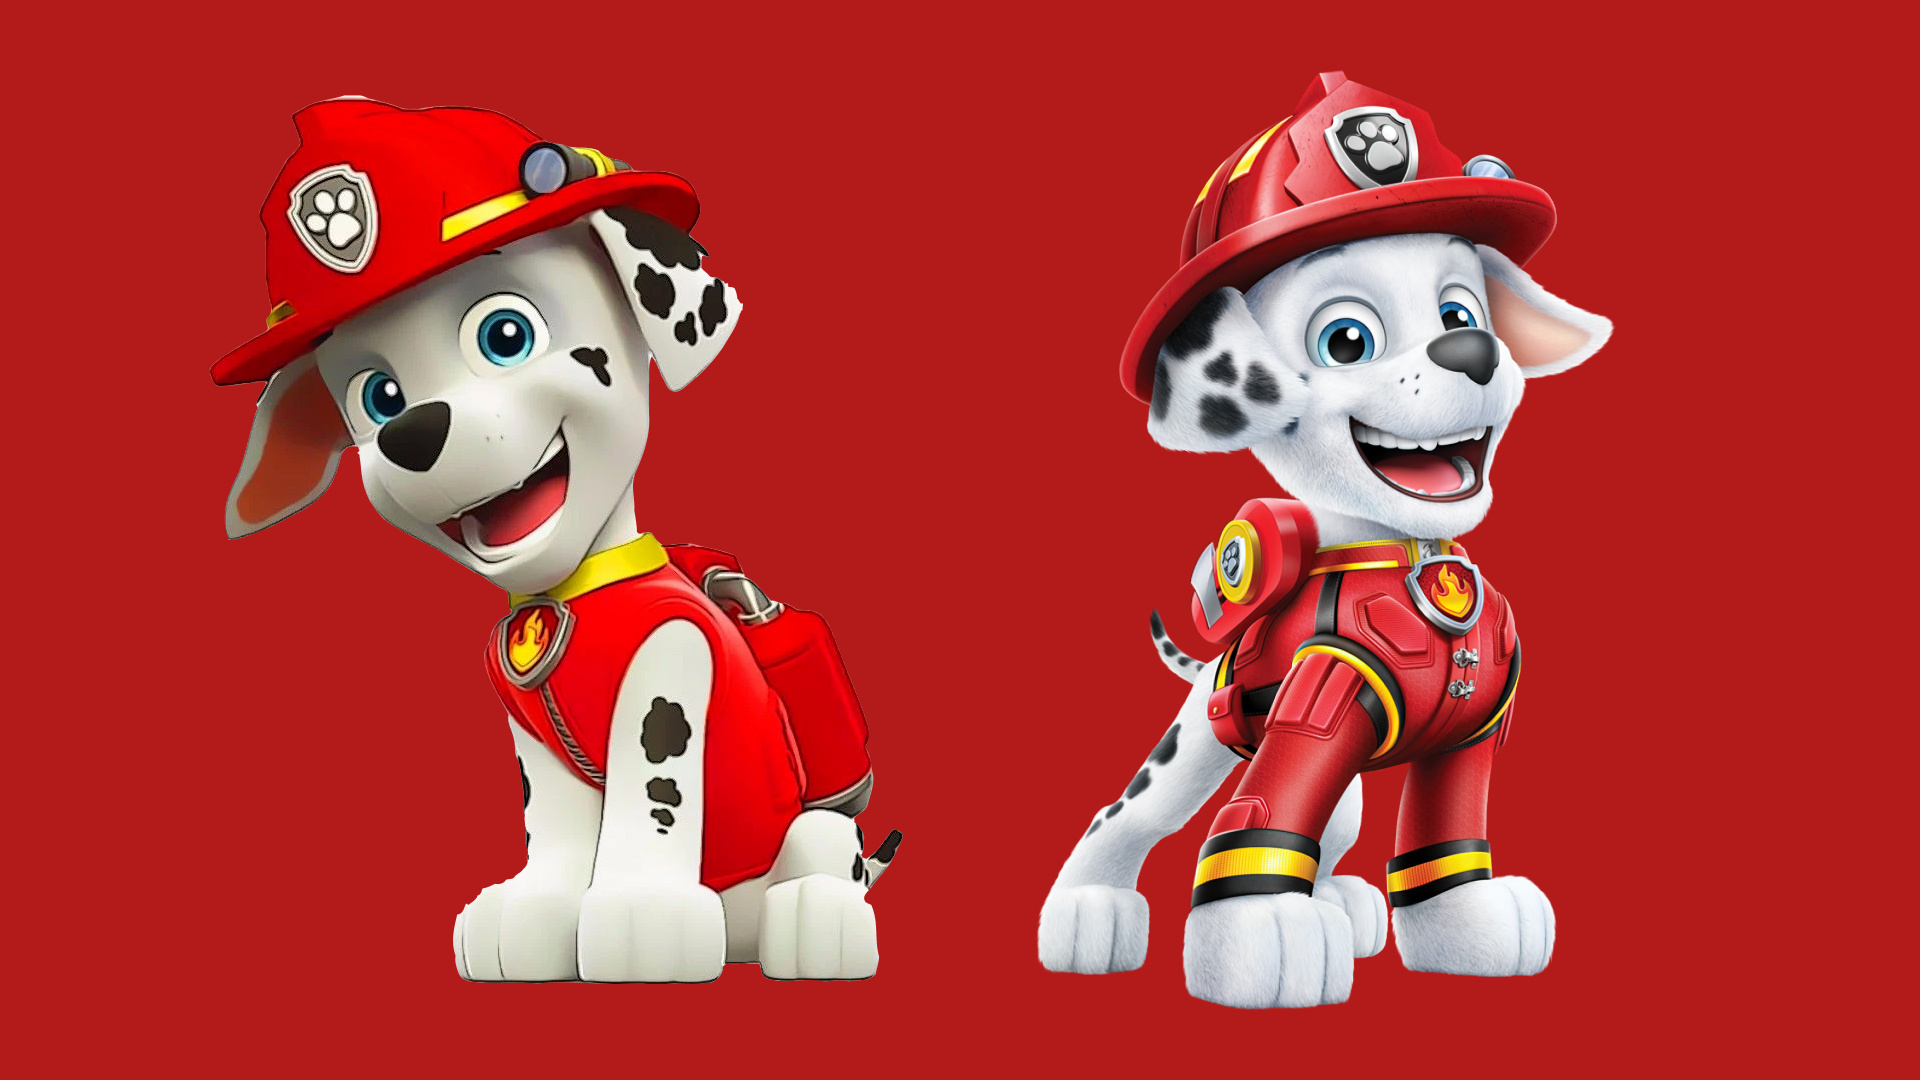 Paw Patrol protagonists, Animated series, Movie comparison, Side by side, 1920x1080 Full HD Desktop